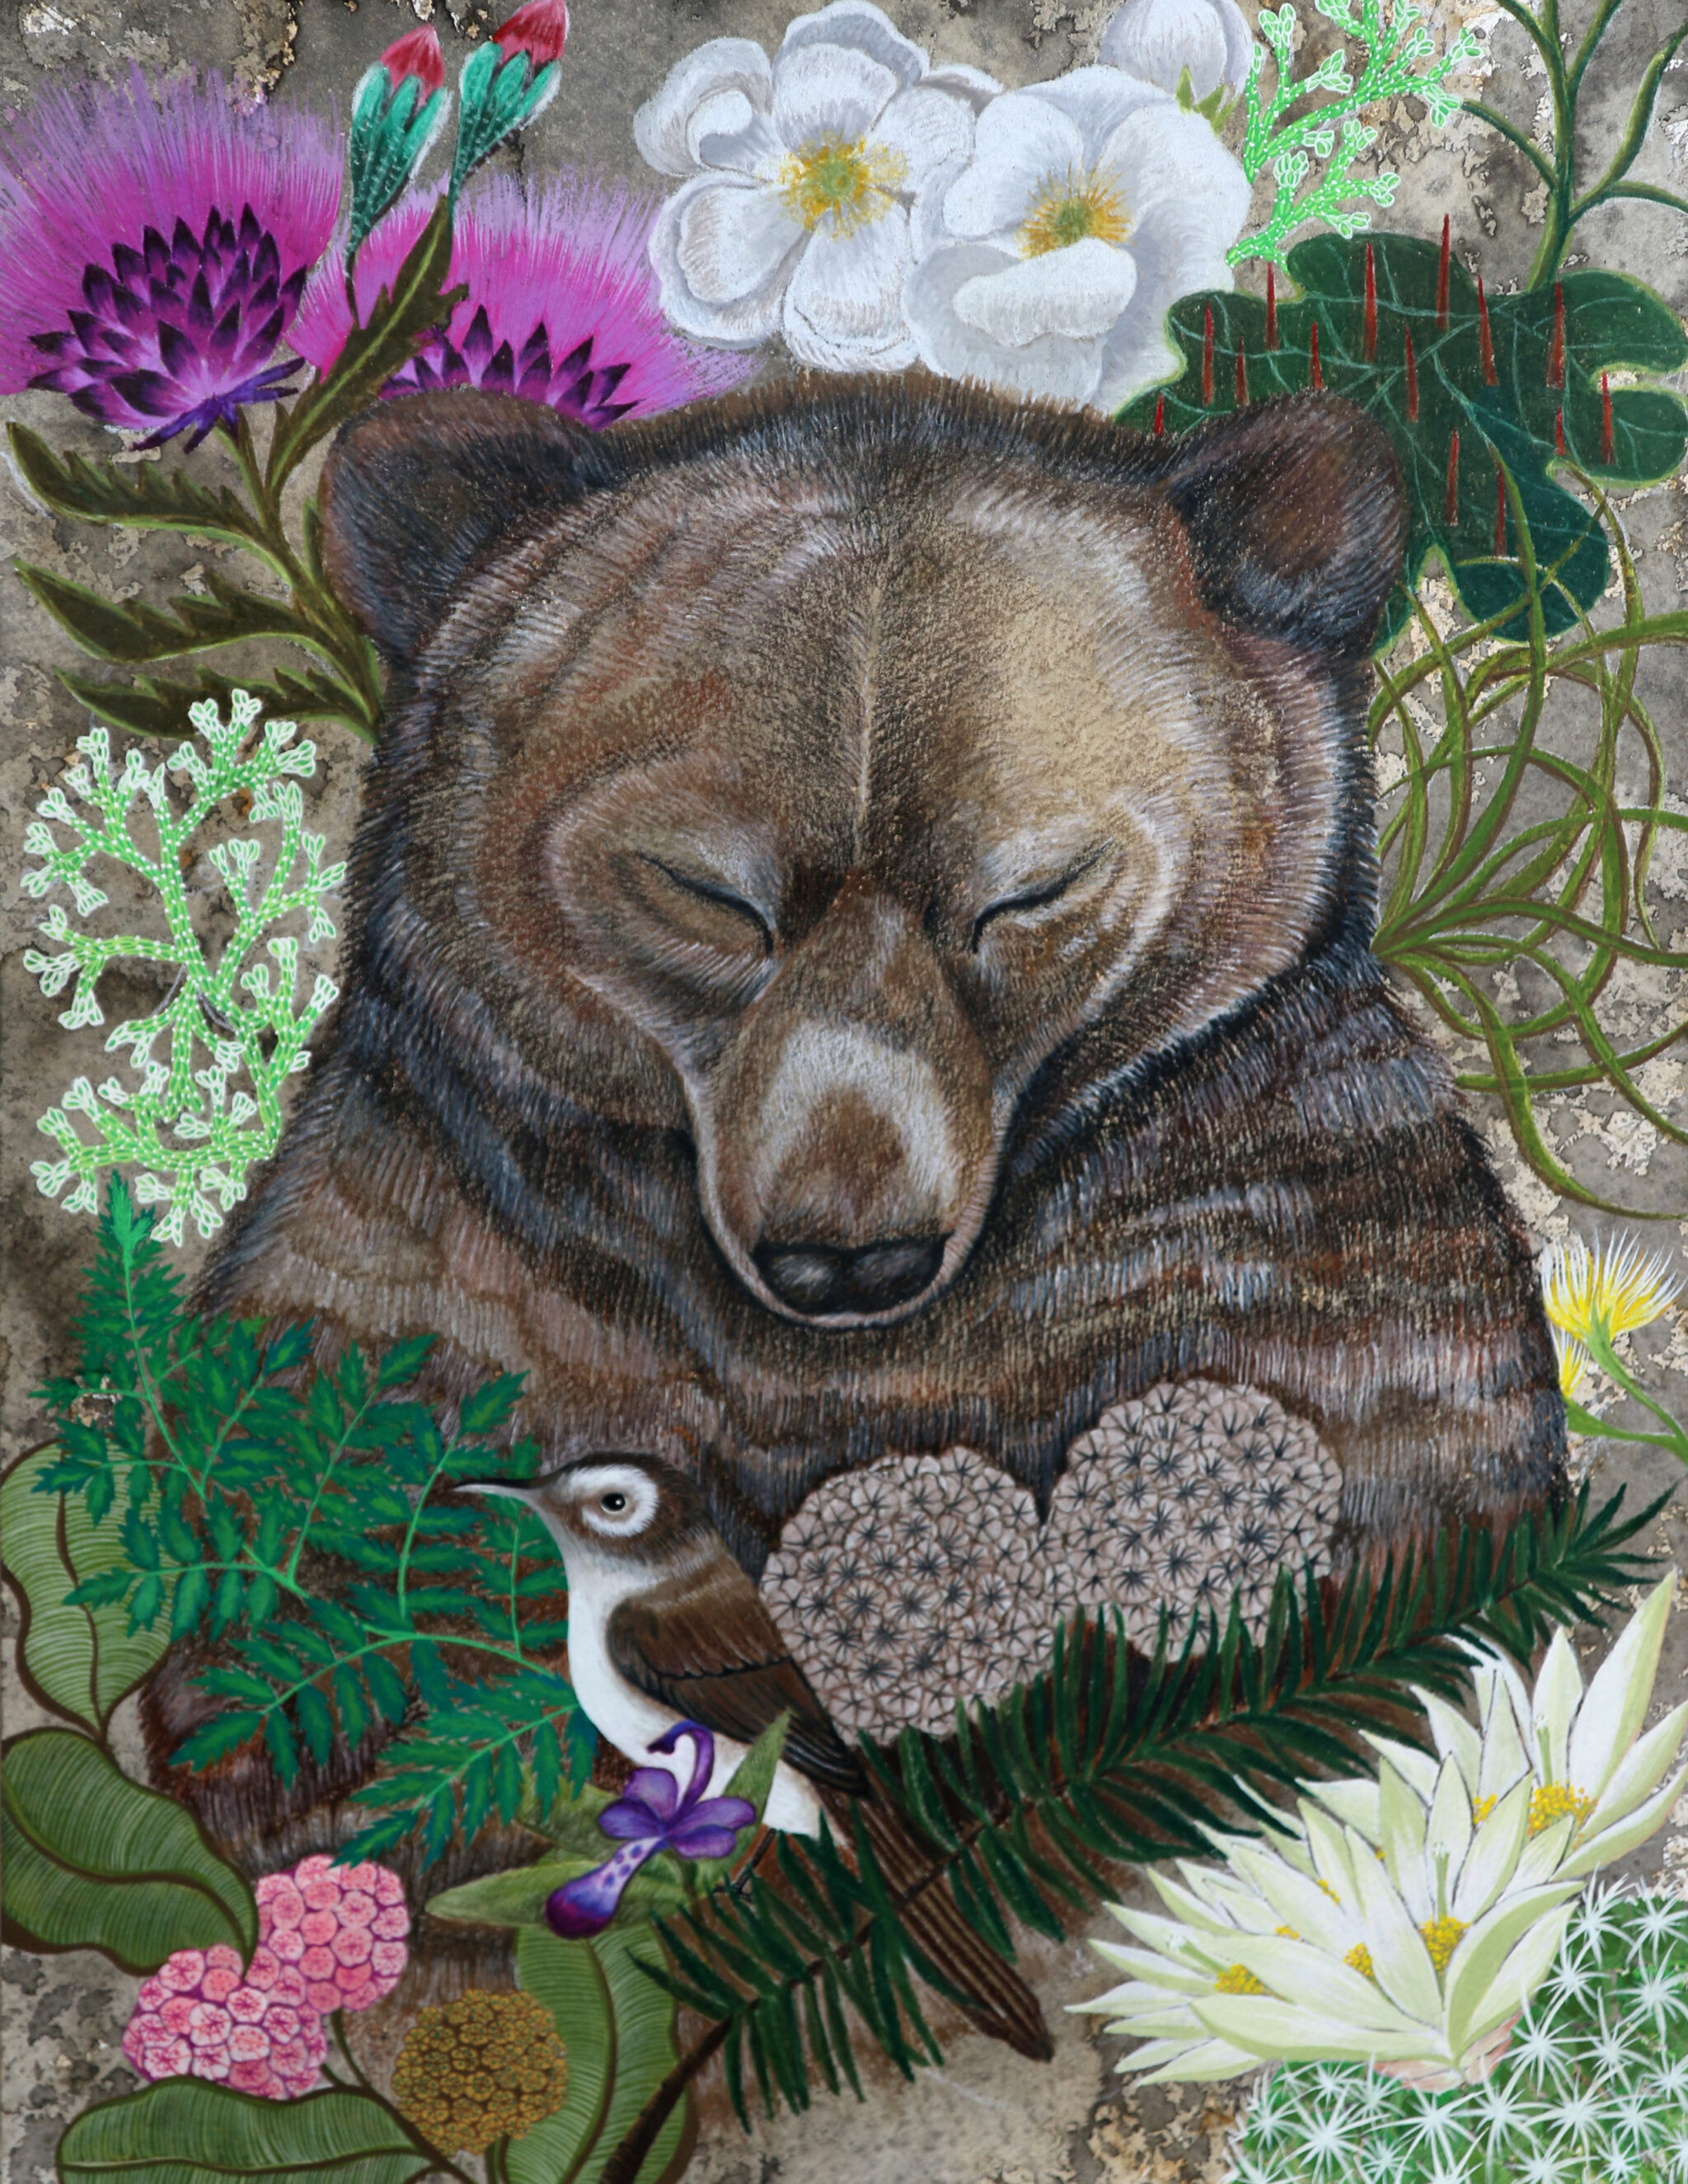 Winners Announced in 2016 Saving Endangered Species Youth Art Contest